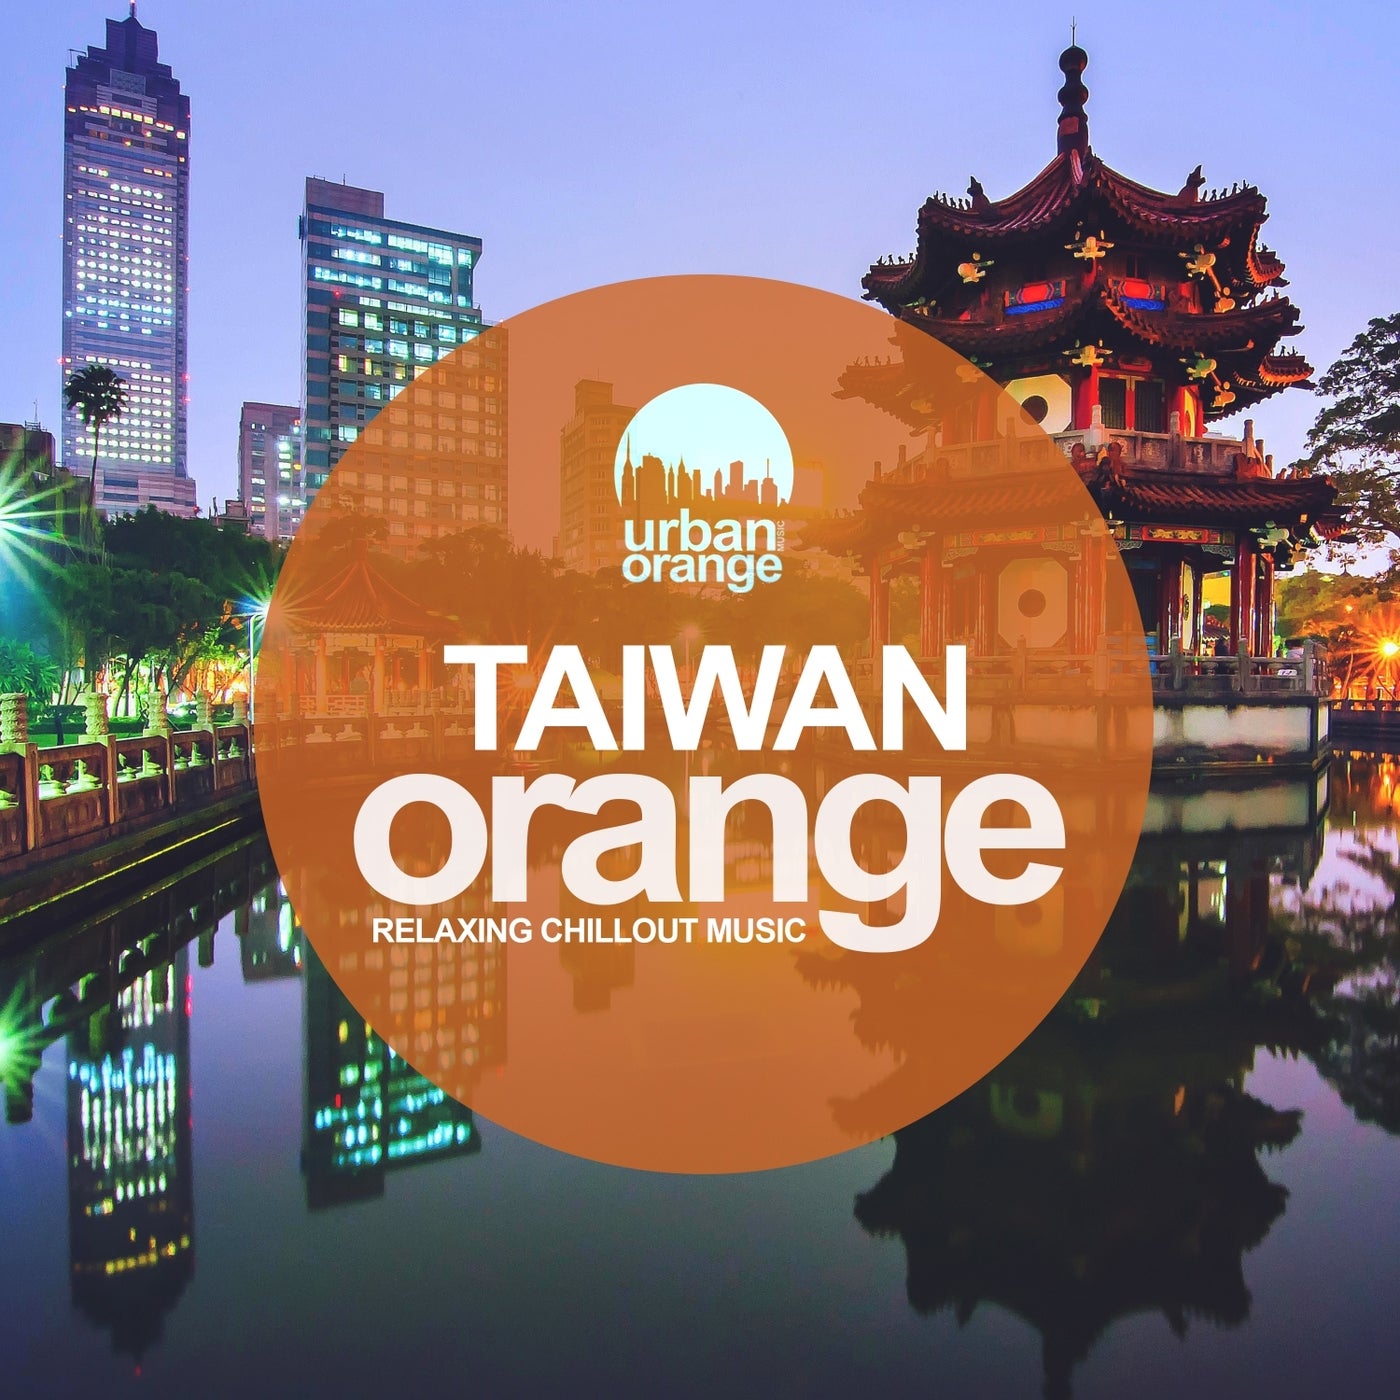 Taiwan Orange: Relaxing Chillout Music